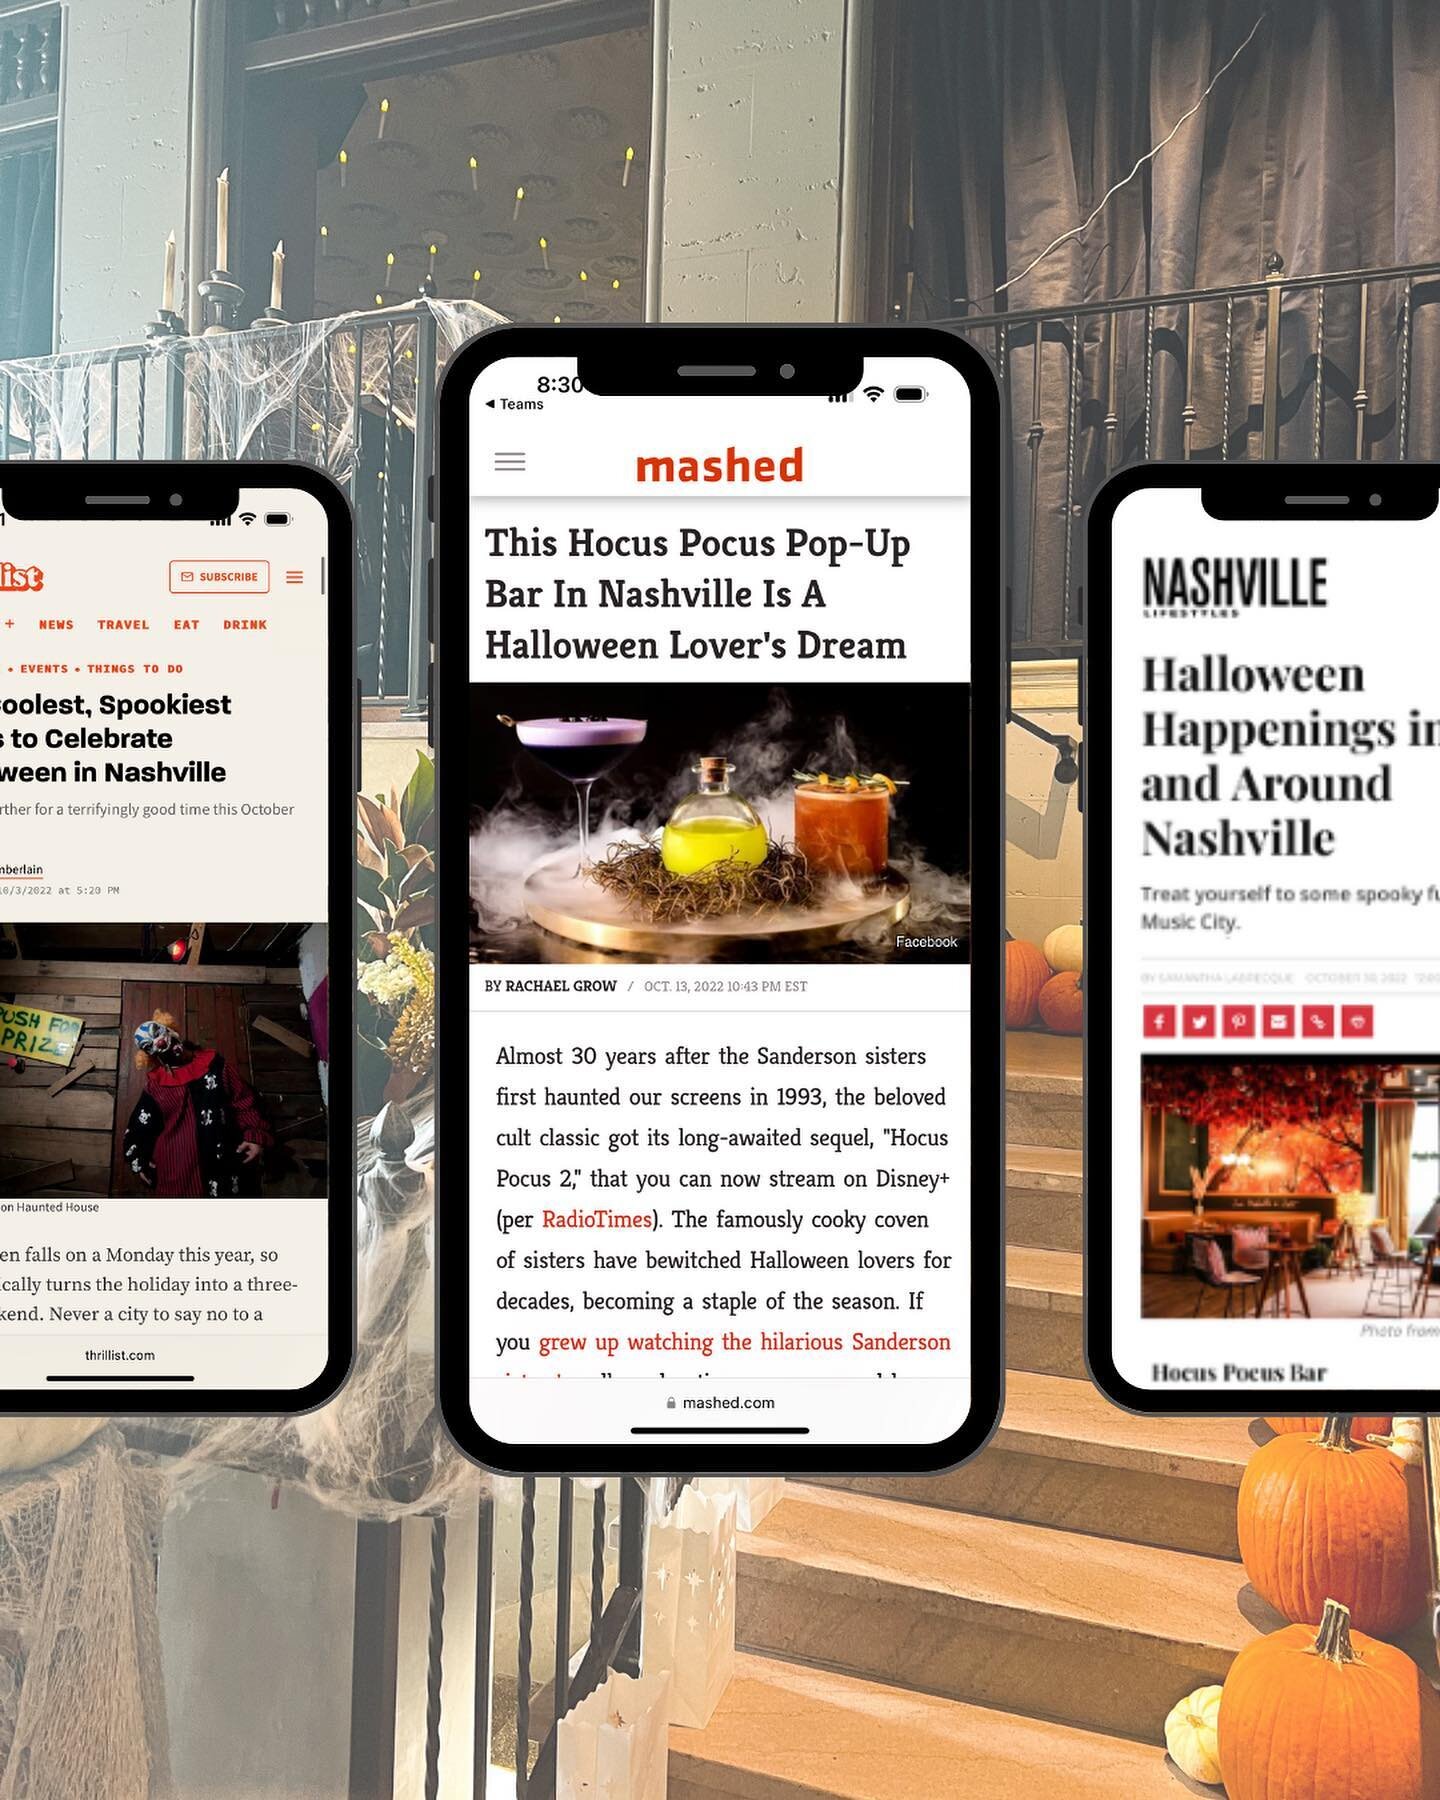 With results like these, there is nothing spooky about this #Nashville popup bar. 👻&nbsp;

Together, our PR and Influencer marketing teams generate results that move the needle for our clients. SWIPE to see how @holston_house_nashville Hocus Pocus p